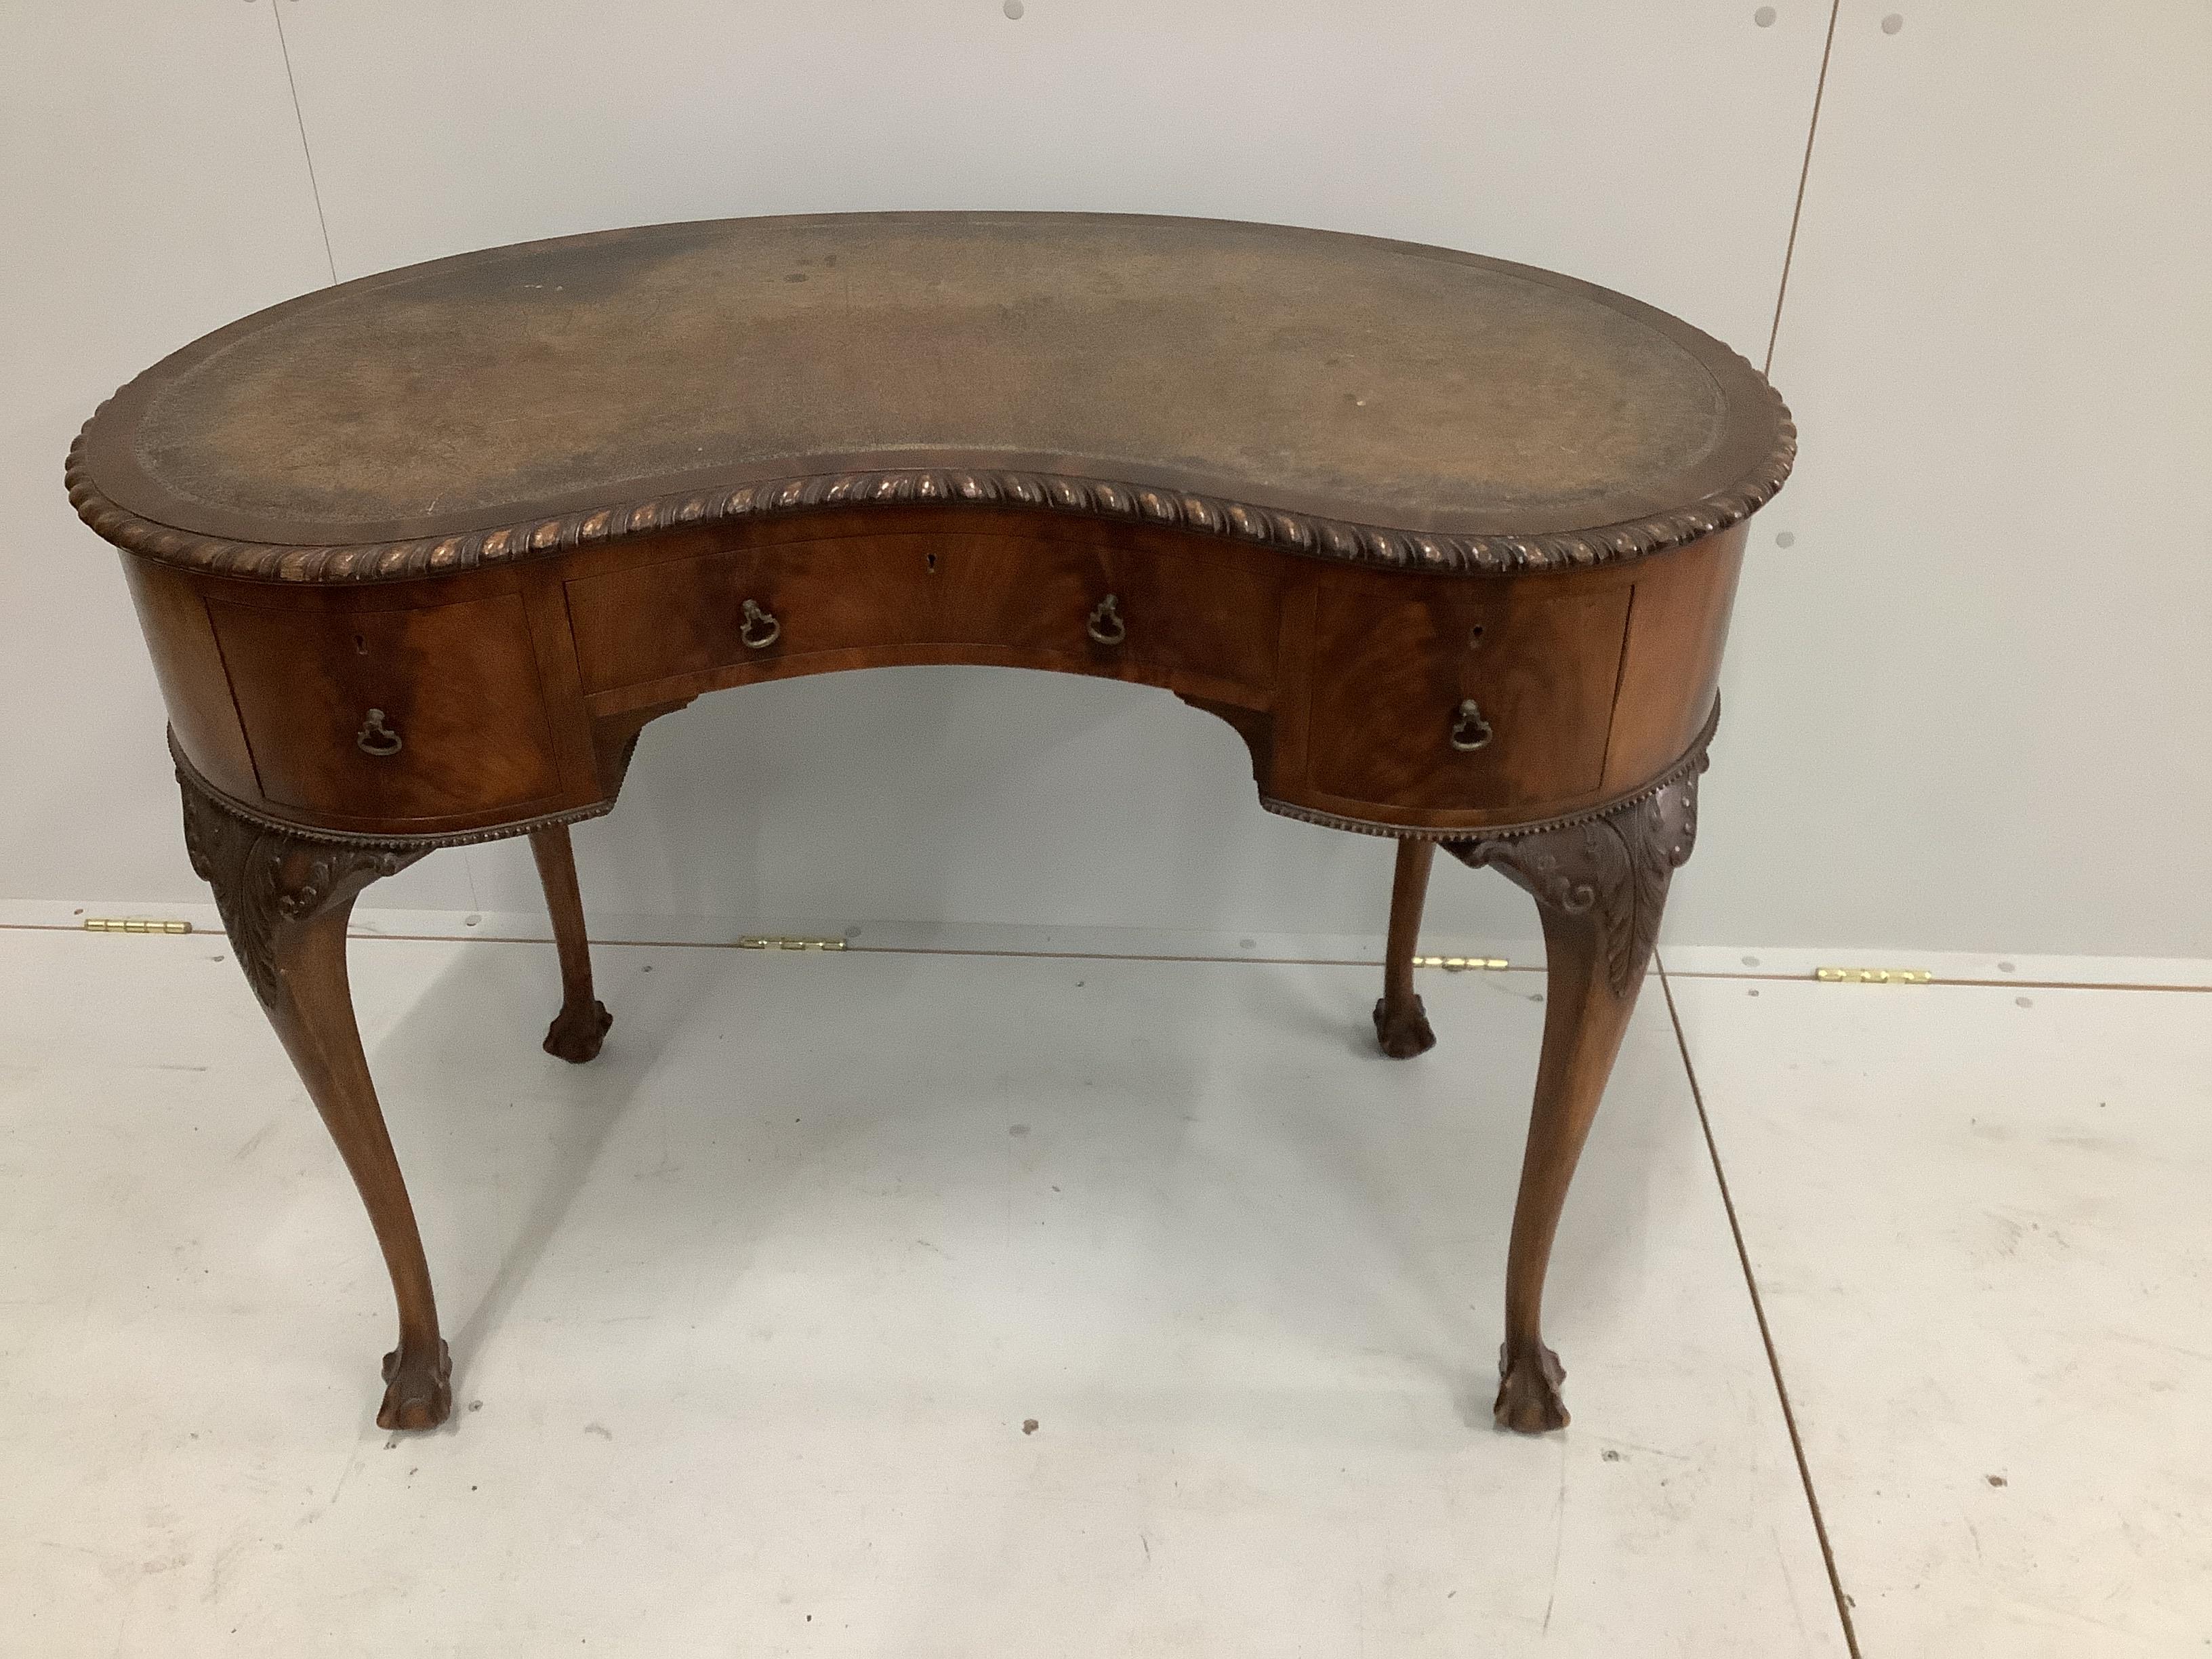 An early 20th century Chippendale revival mahogany kidney shape writing table, width 106cm, depth 60cm, height 77cm